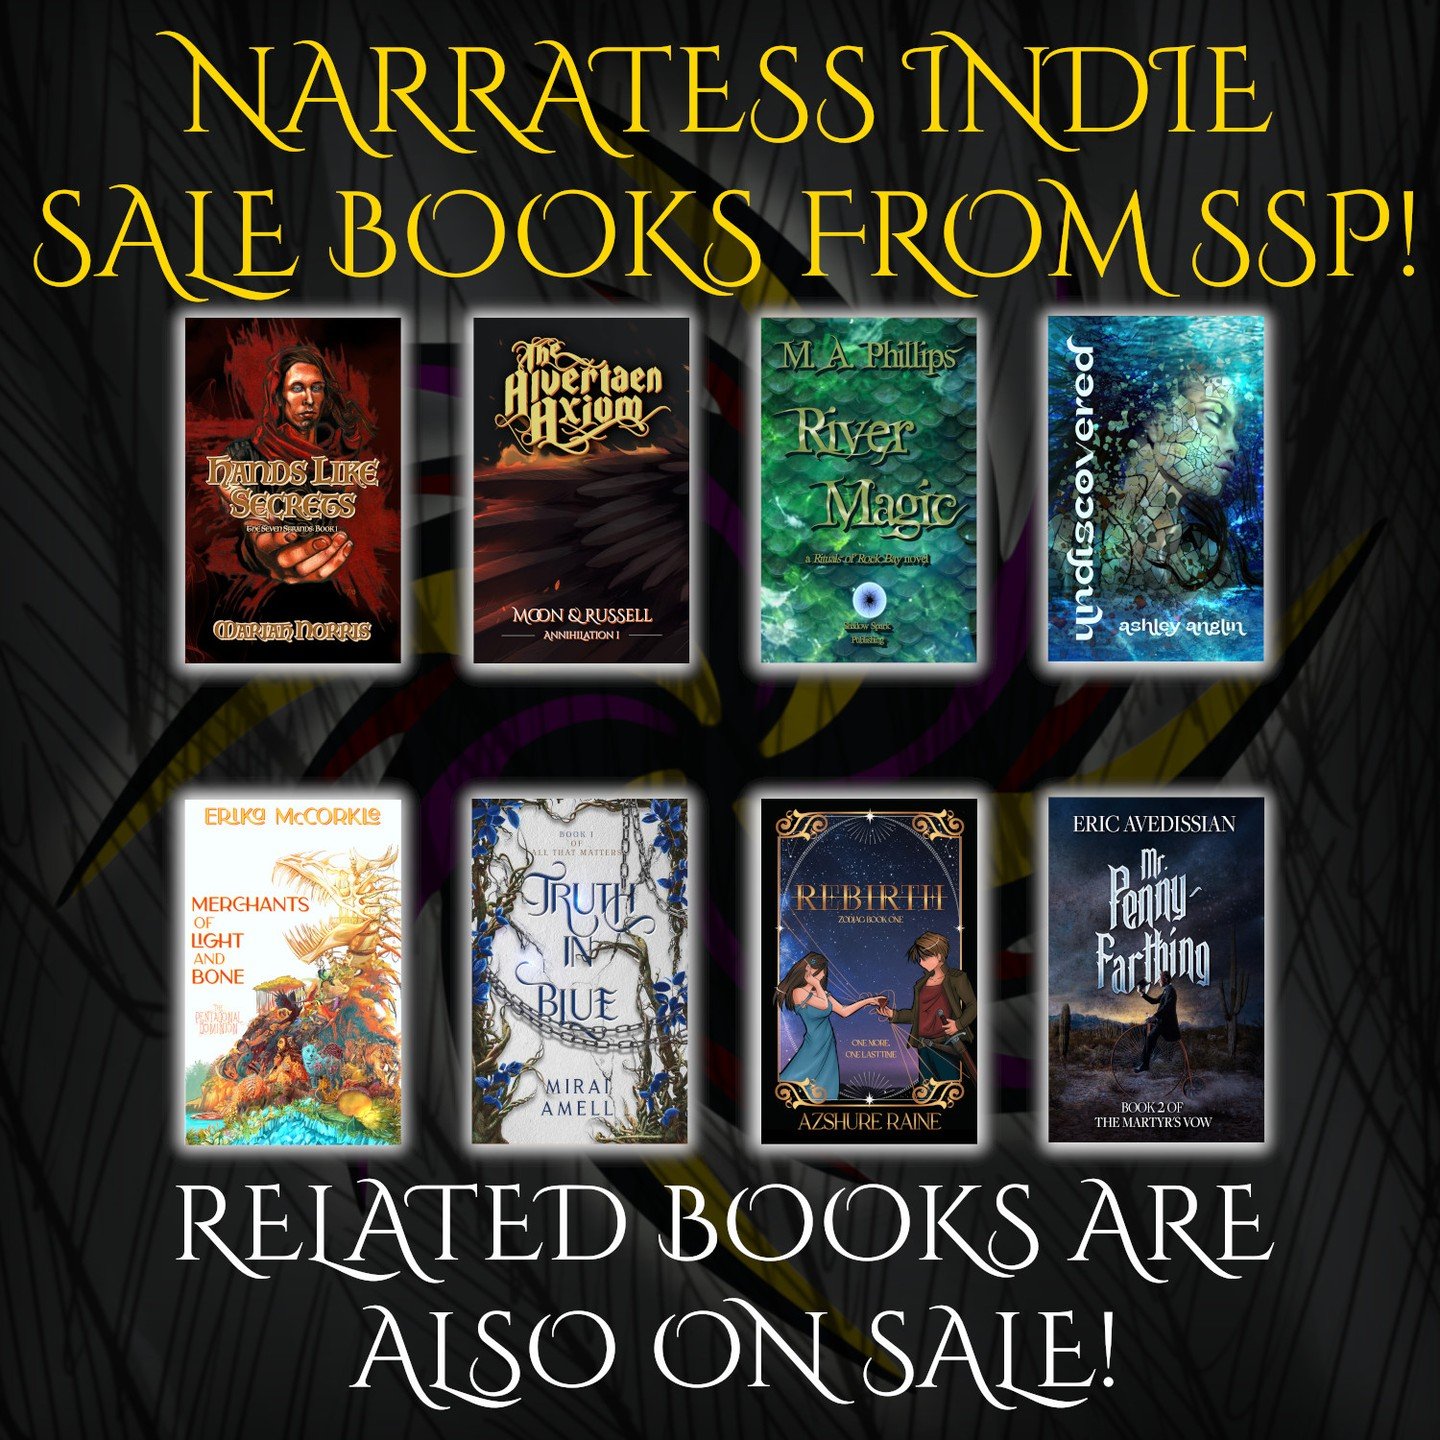 Happy #IndieApril! 

If you're looking to support an #IndiePublisher and their authors, these Shadow Spark titles are on sale as part of the Narratess Indie Sale this weekend! 

#narratessindiesale #ShadowSparkPublishing #Bookstagram #AmReading #Book